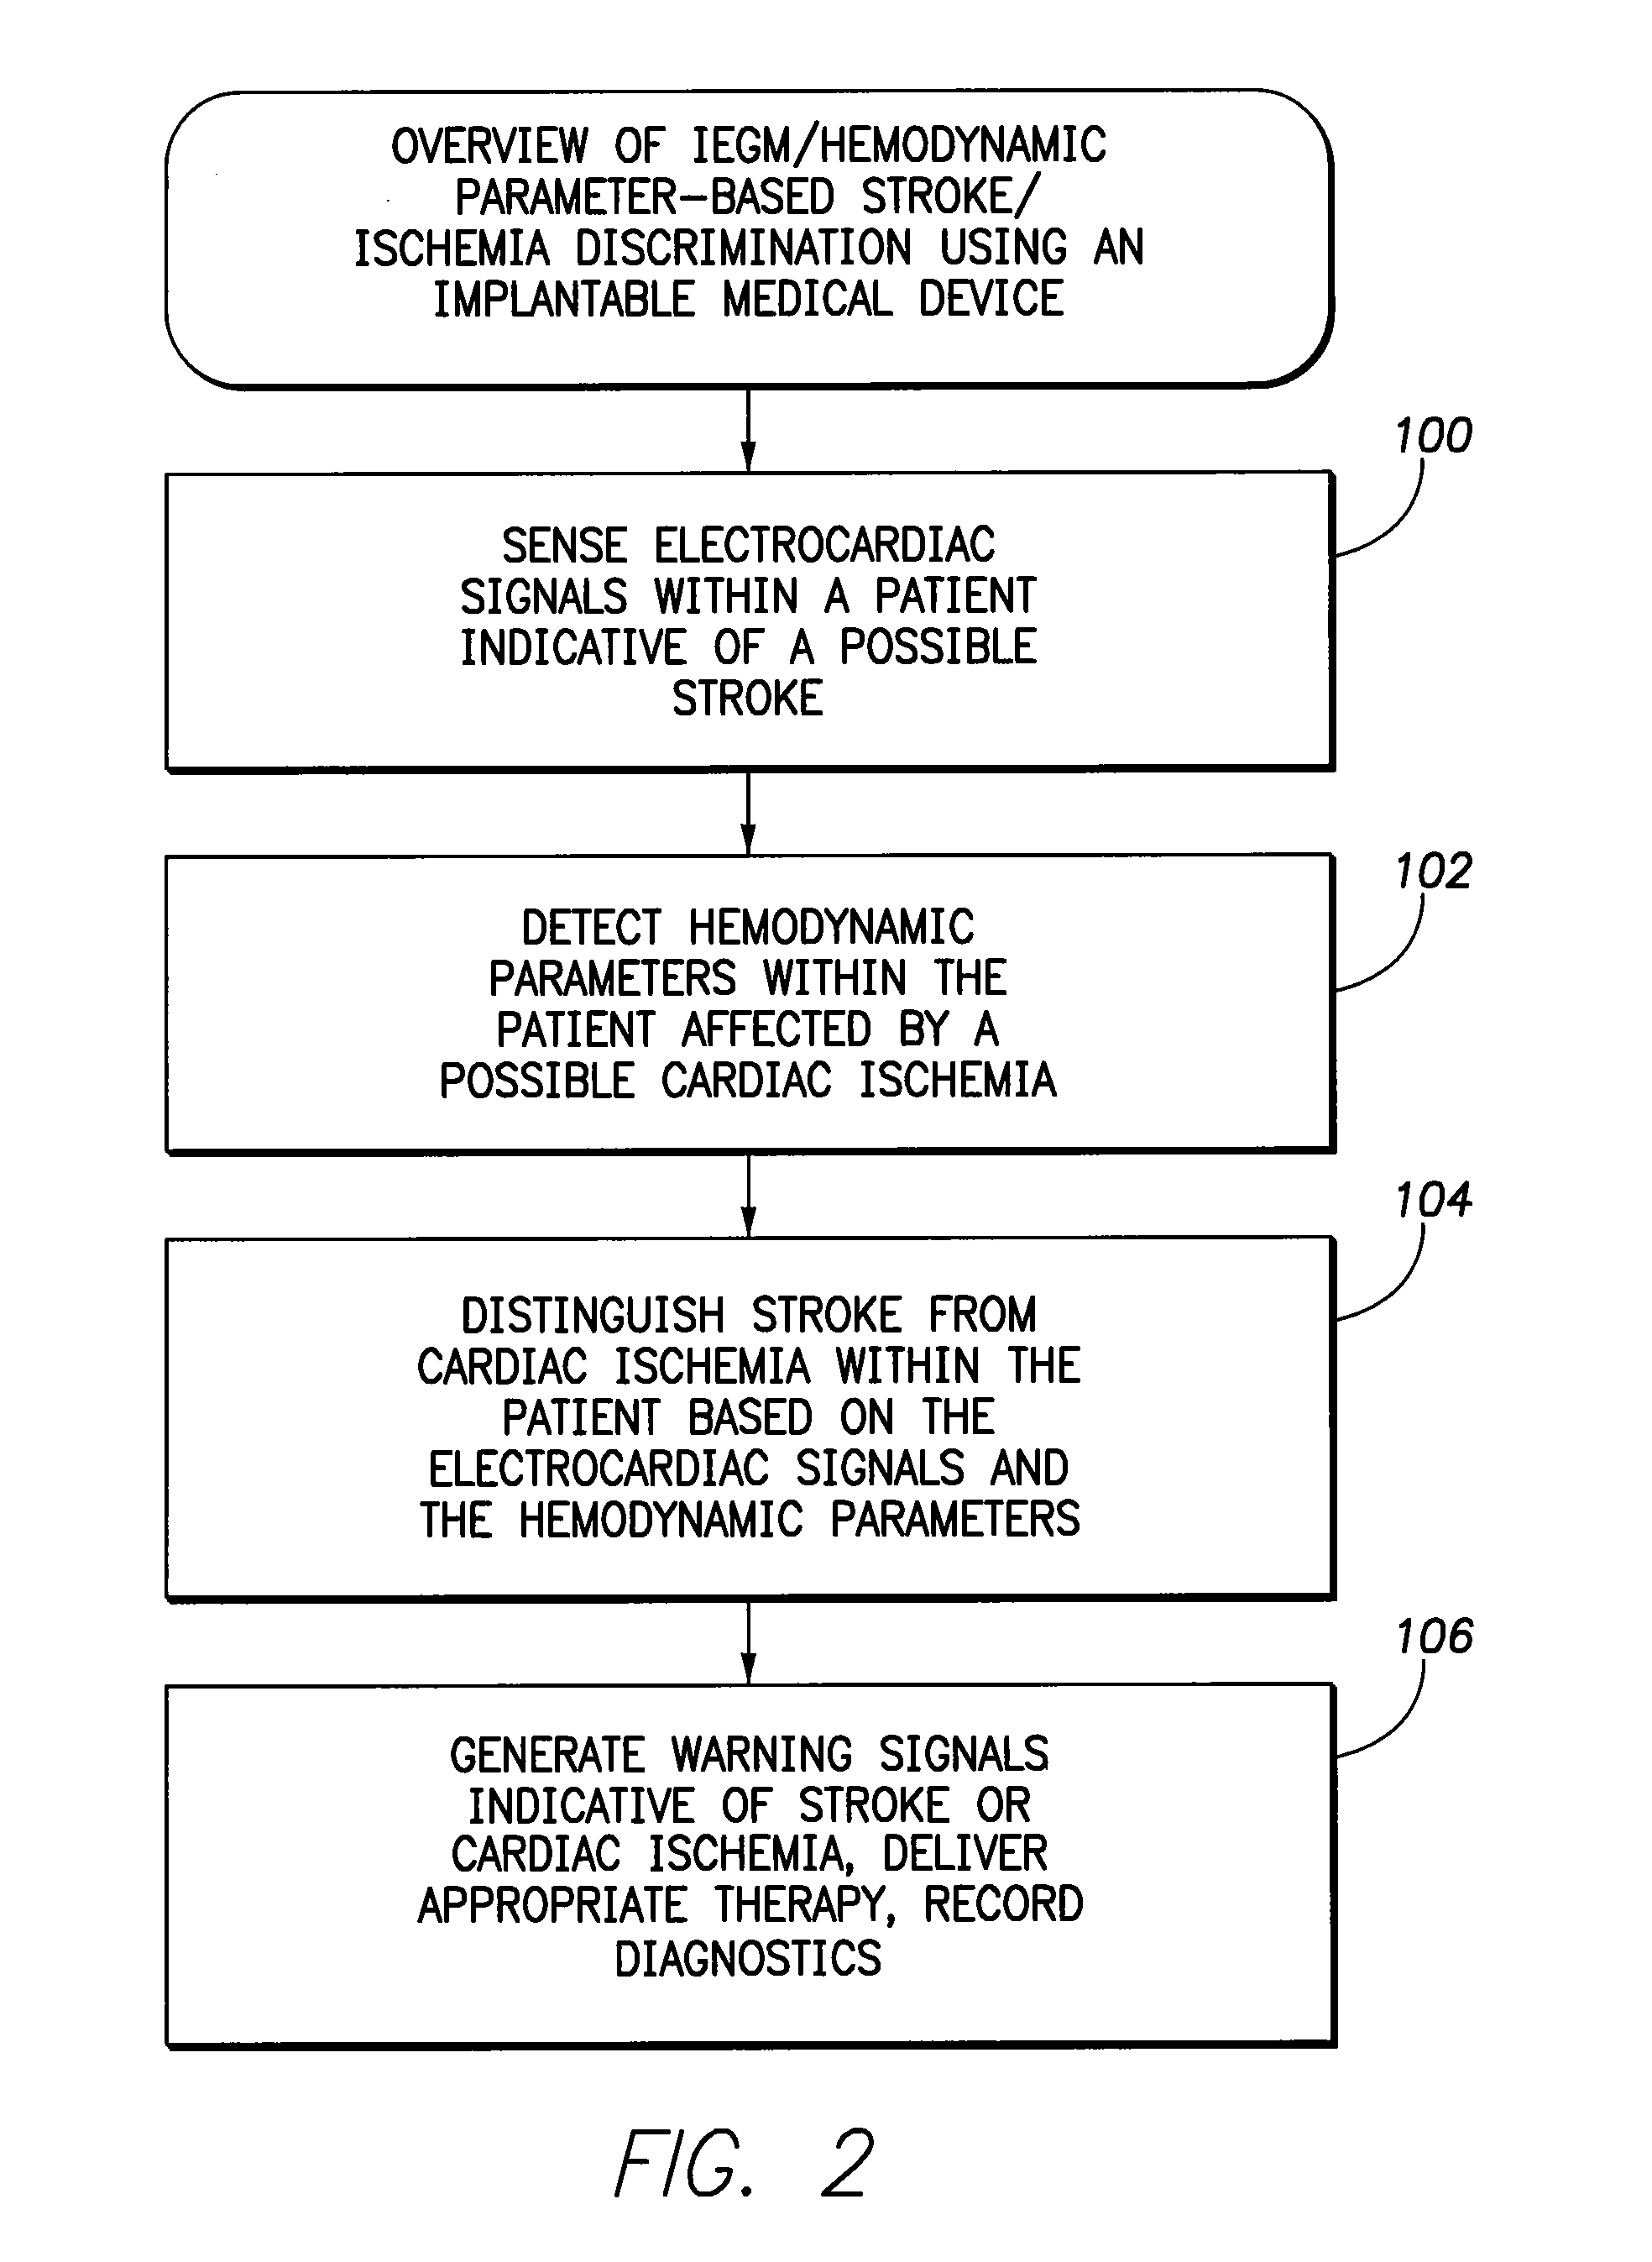 Systems and Methods for Use By an Implantable Medical Device for Detecting and Discriminating Stroke and Cardiac Ischemia Using Electrocardiac Signals and Hemodynamic Parameters